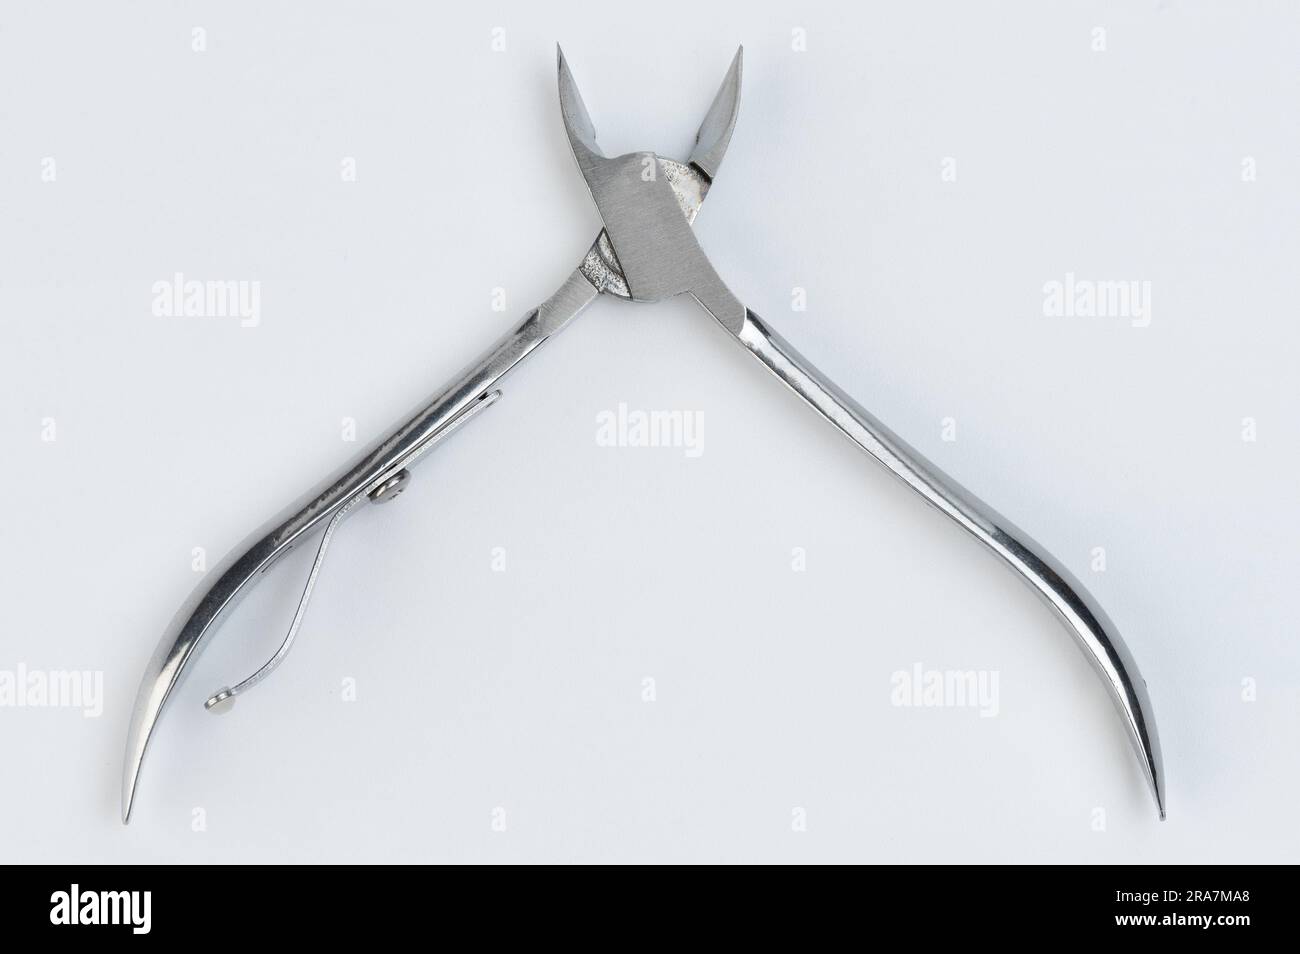 Nail foot open scissors close up view isolated on studio background Stock Photo